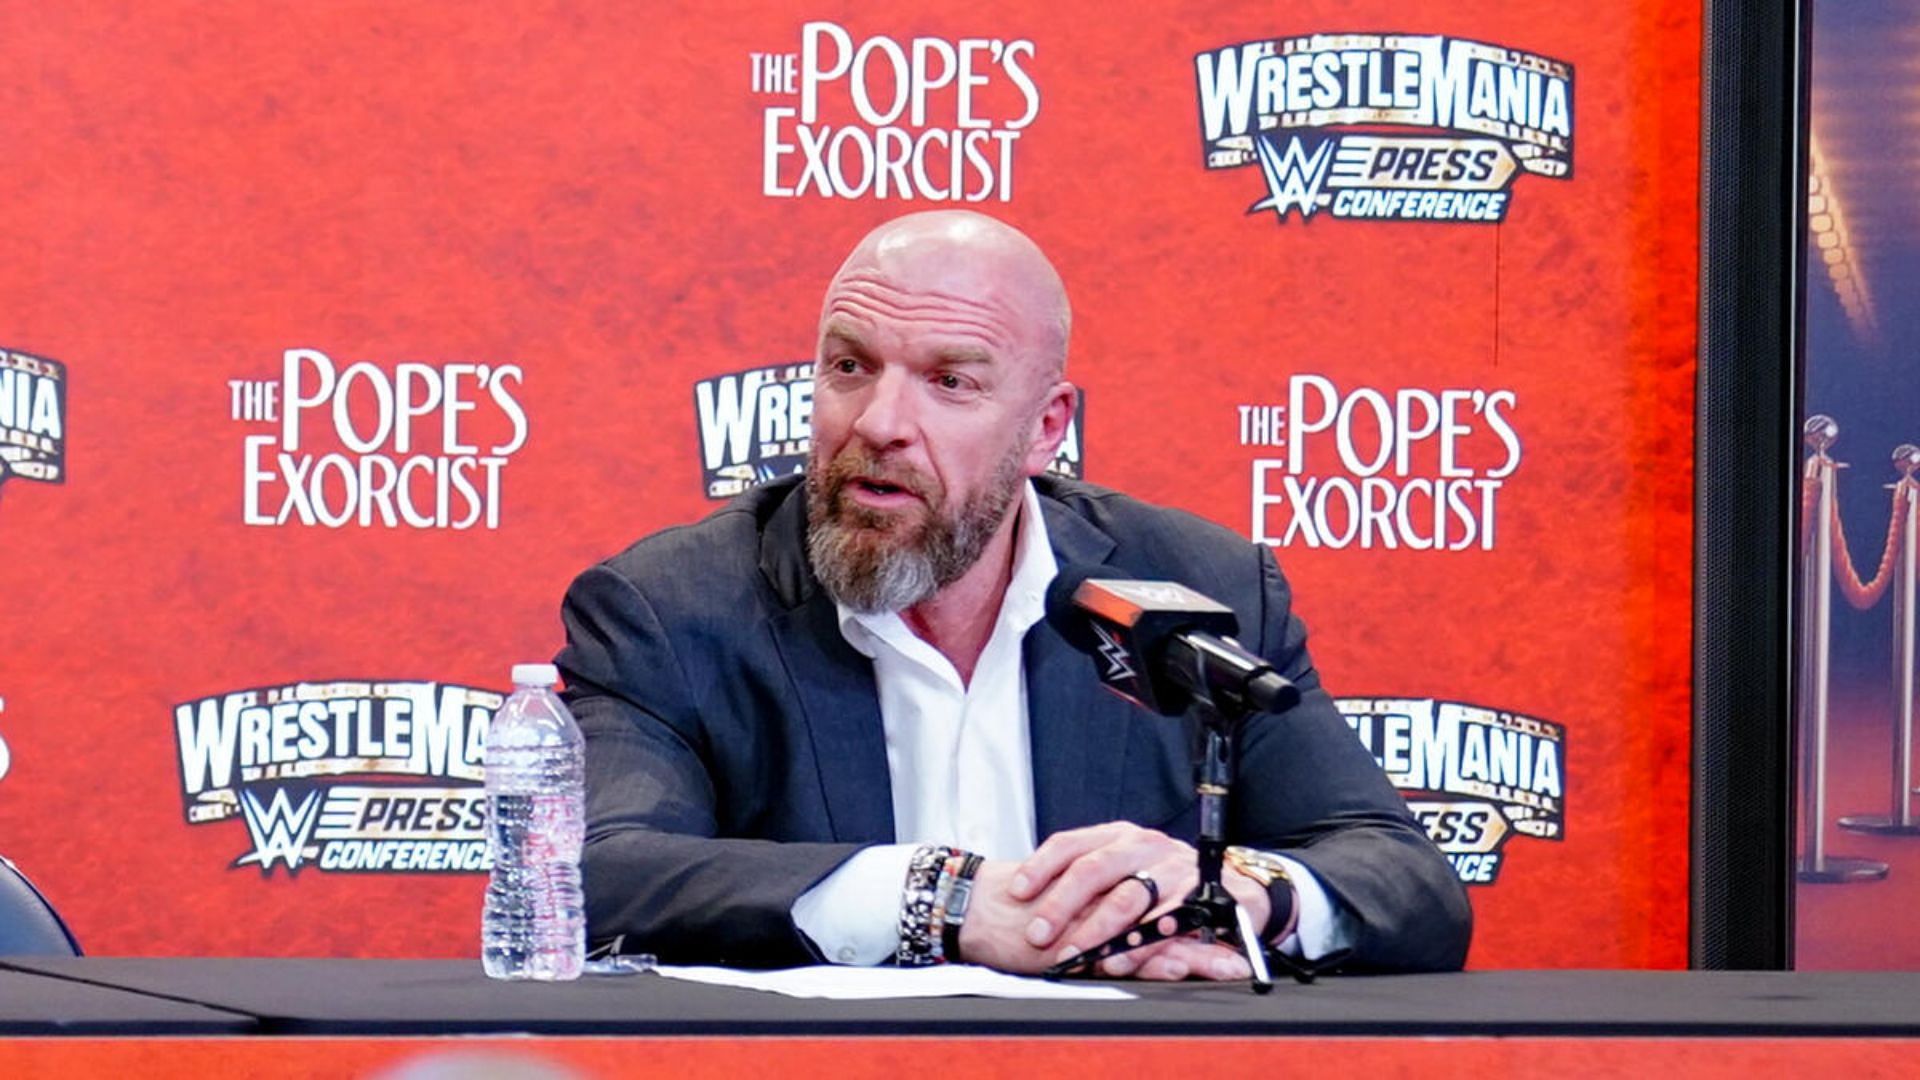 Triple H has made quite a few changes after rising in power in WWE